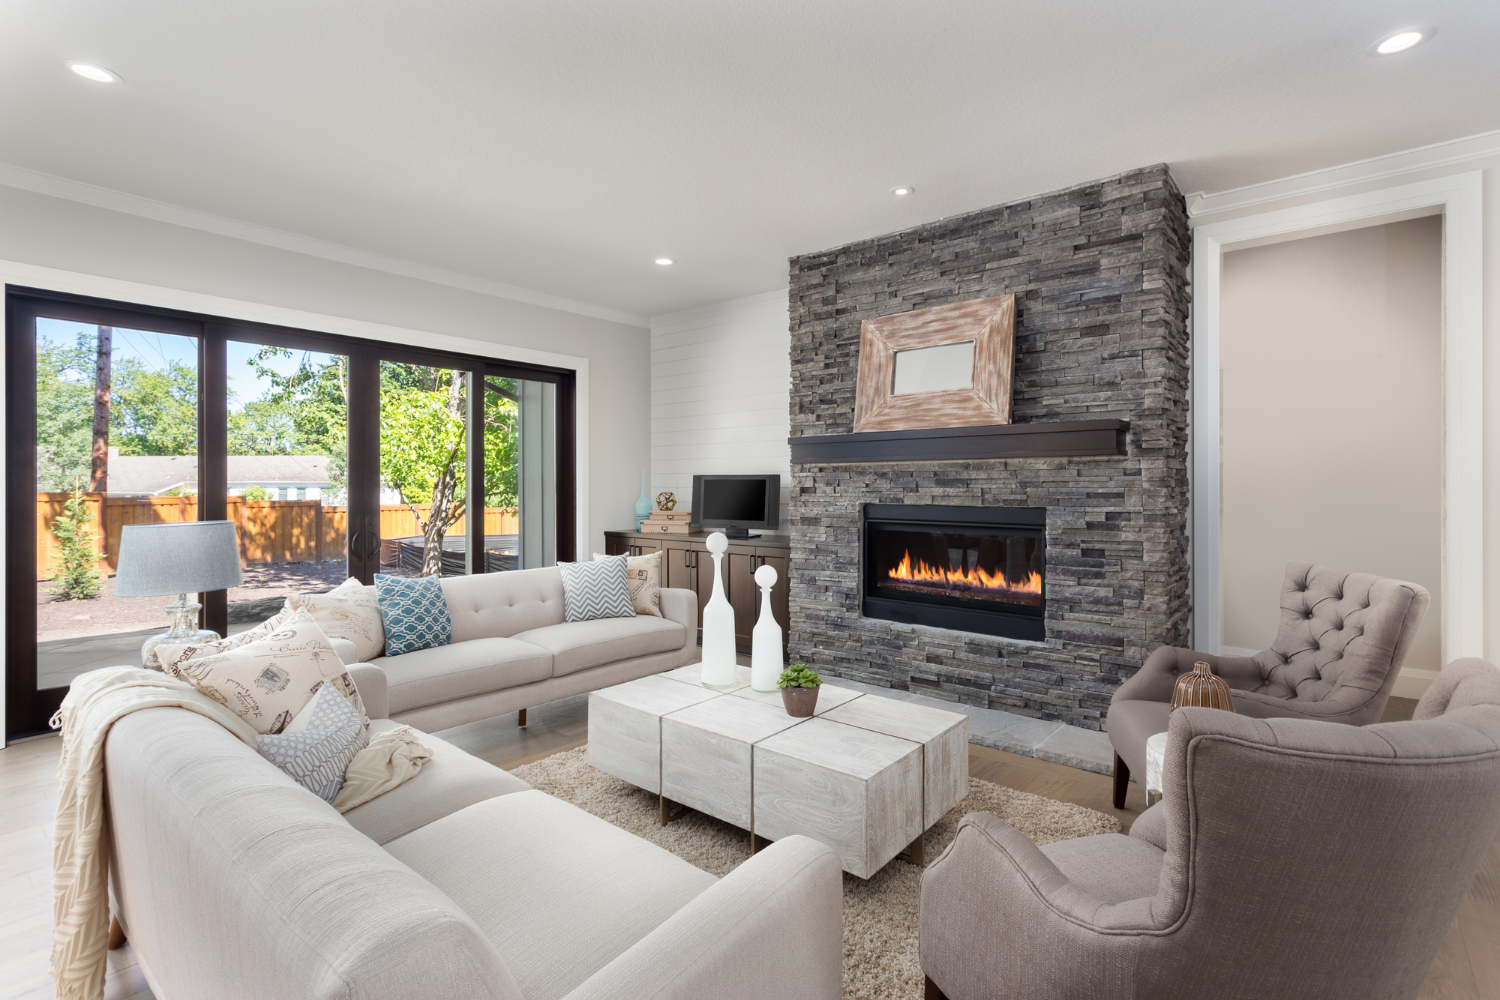 pamela-sandall-design-santa-monica-ca-interior-design-faq-answers-living-room-with-stone-fireplace-sofa-and-chairs-with-large-window-transitional-new-construction